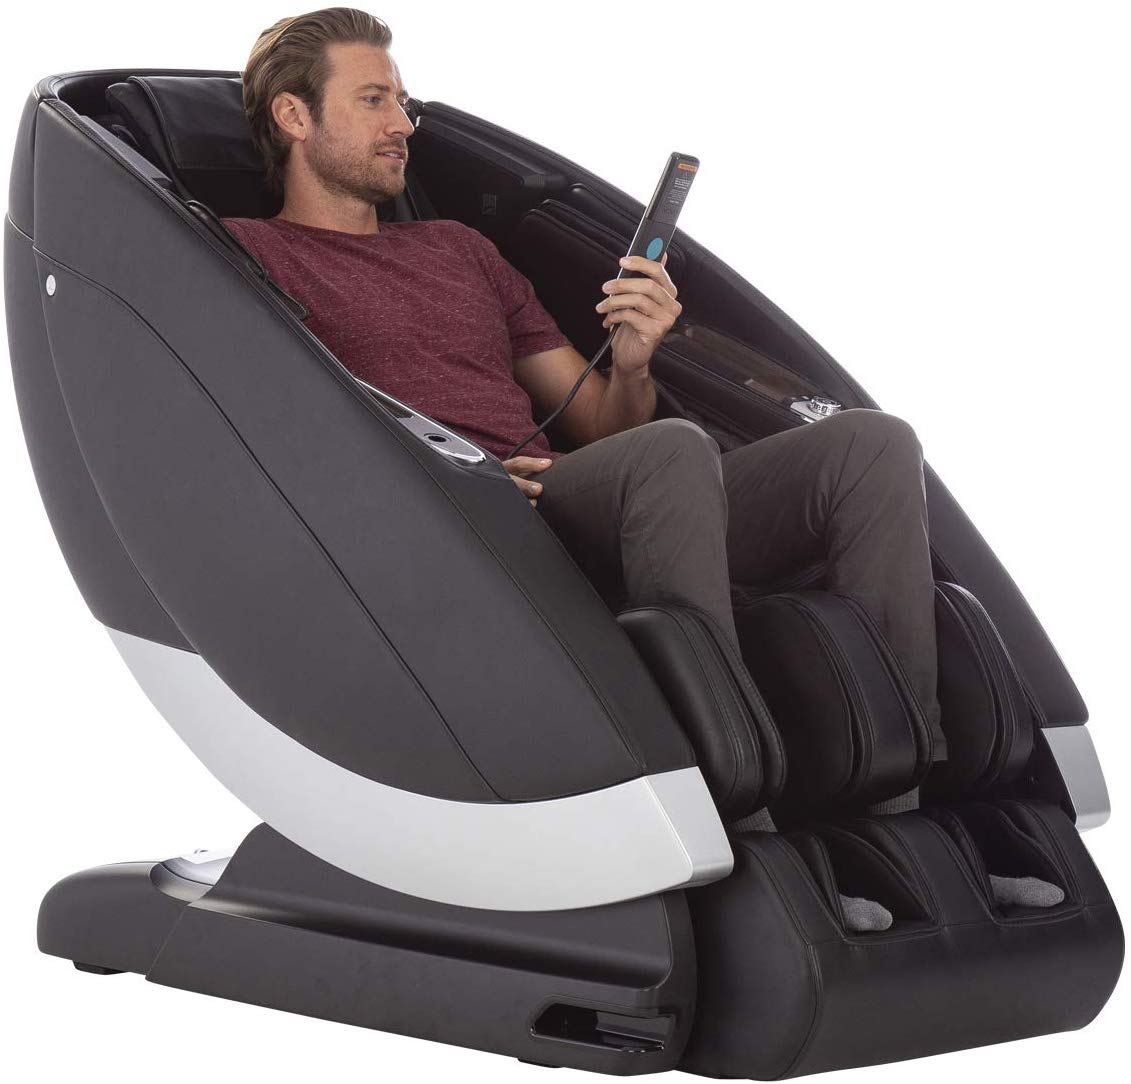 Human Touch Super Novo Massage Chair Review | Massagers-And-More